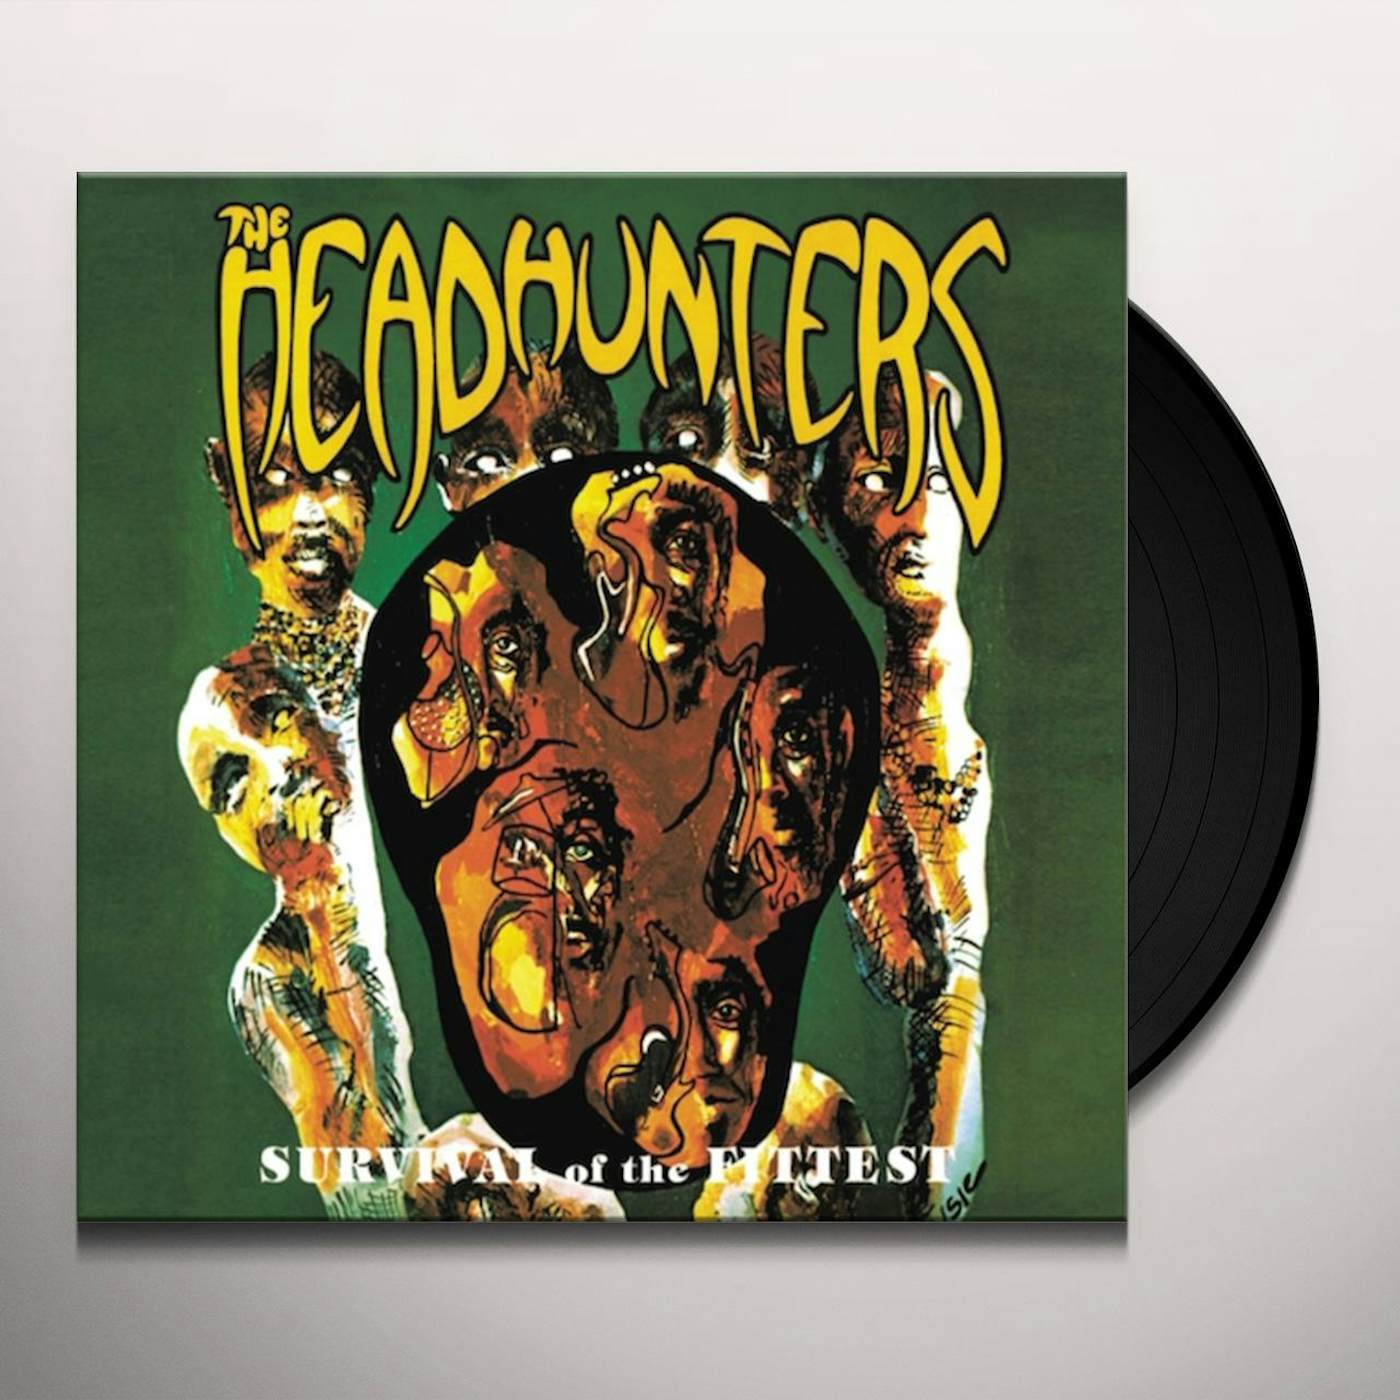 Headhunters Survival Of The Fittest Vinyl Record